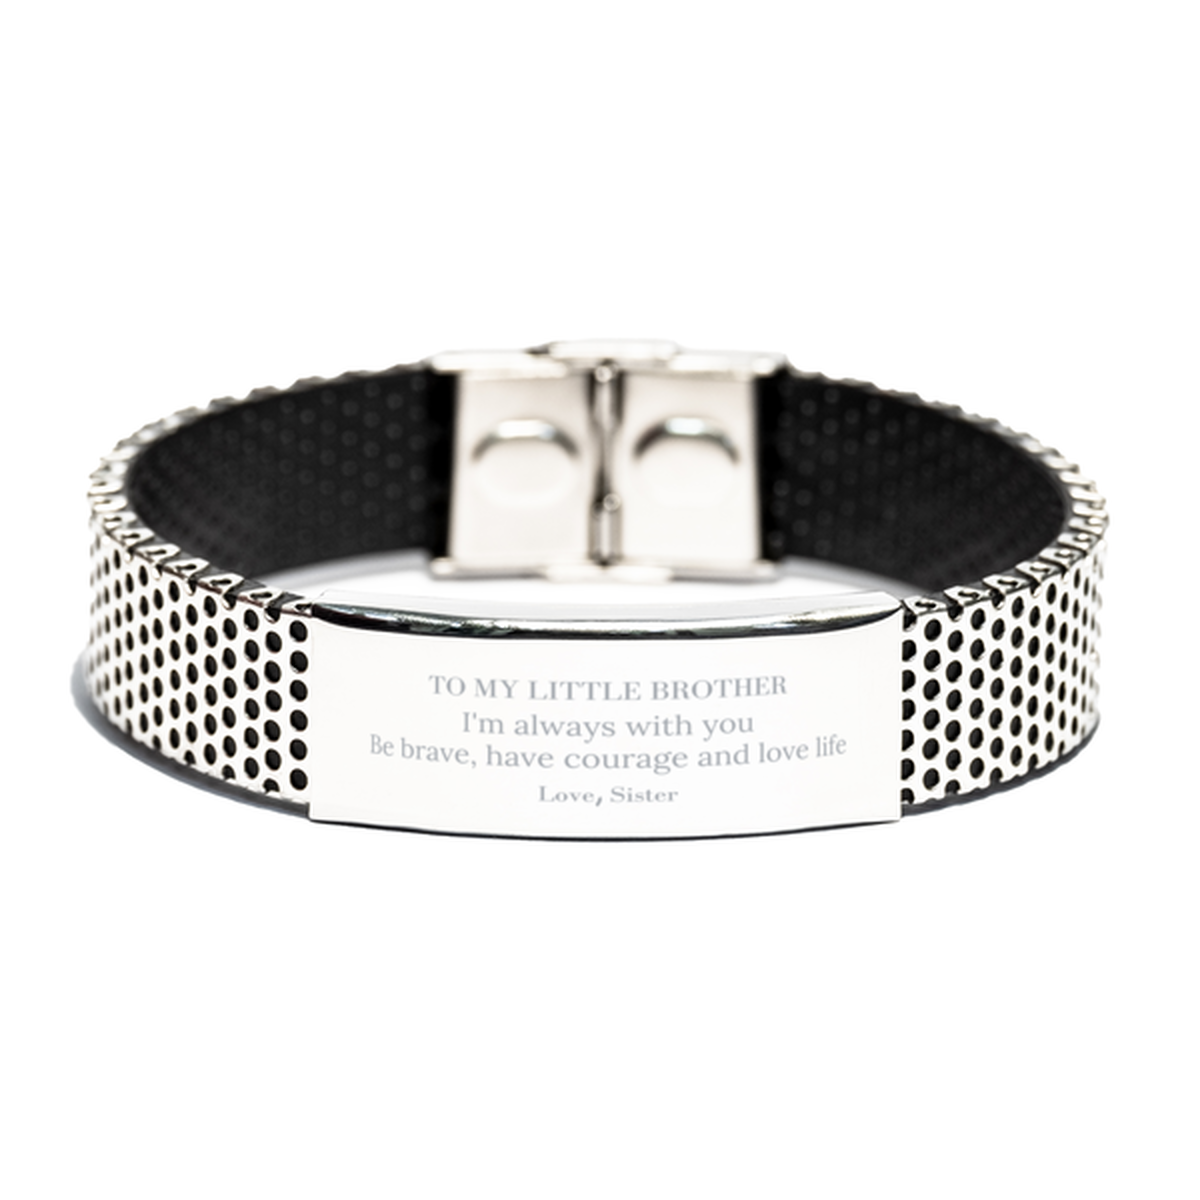 To My Little Brother Gifts from Sister, Unique Stainless Steel Bracelet Inspirational Christmas Birthday Graduation Gifts for Little Brother I'm always with you. Be brave, have courage and love life. Love, Sister